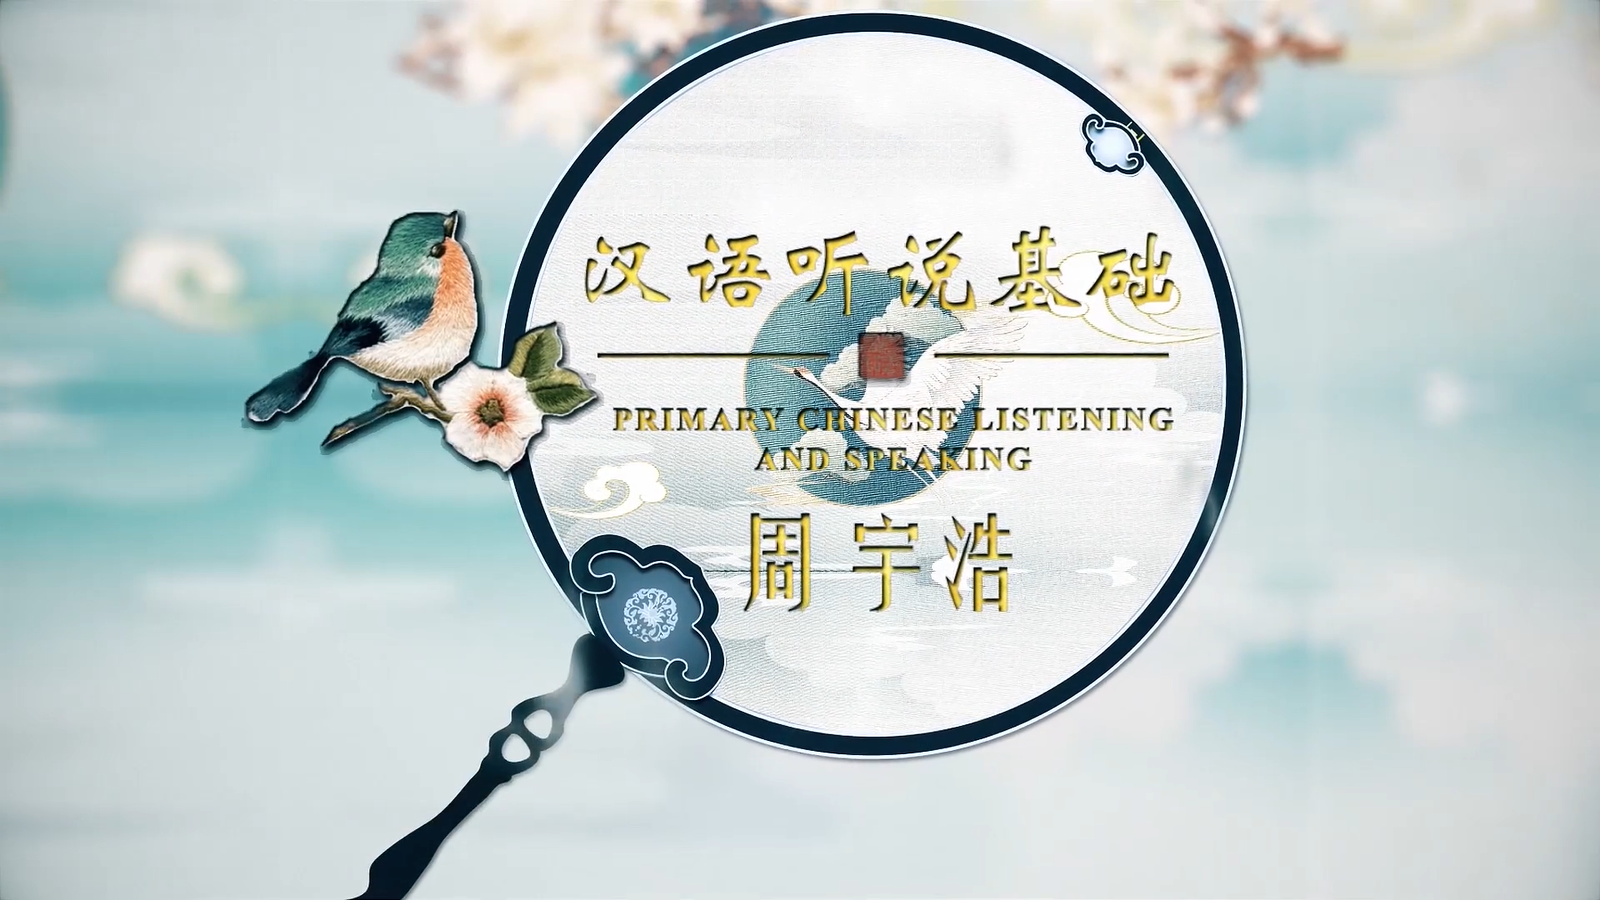 Primary Chinese Listening and Speaking